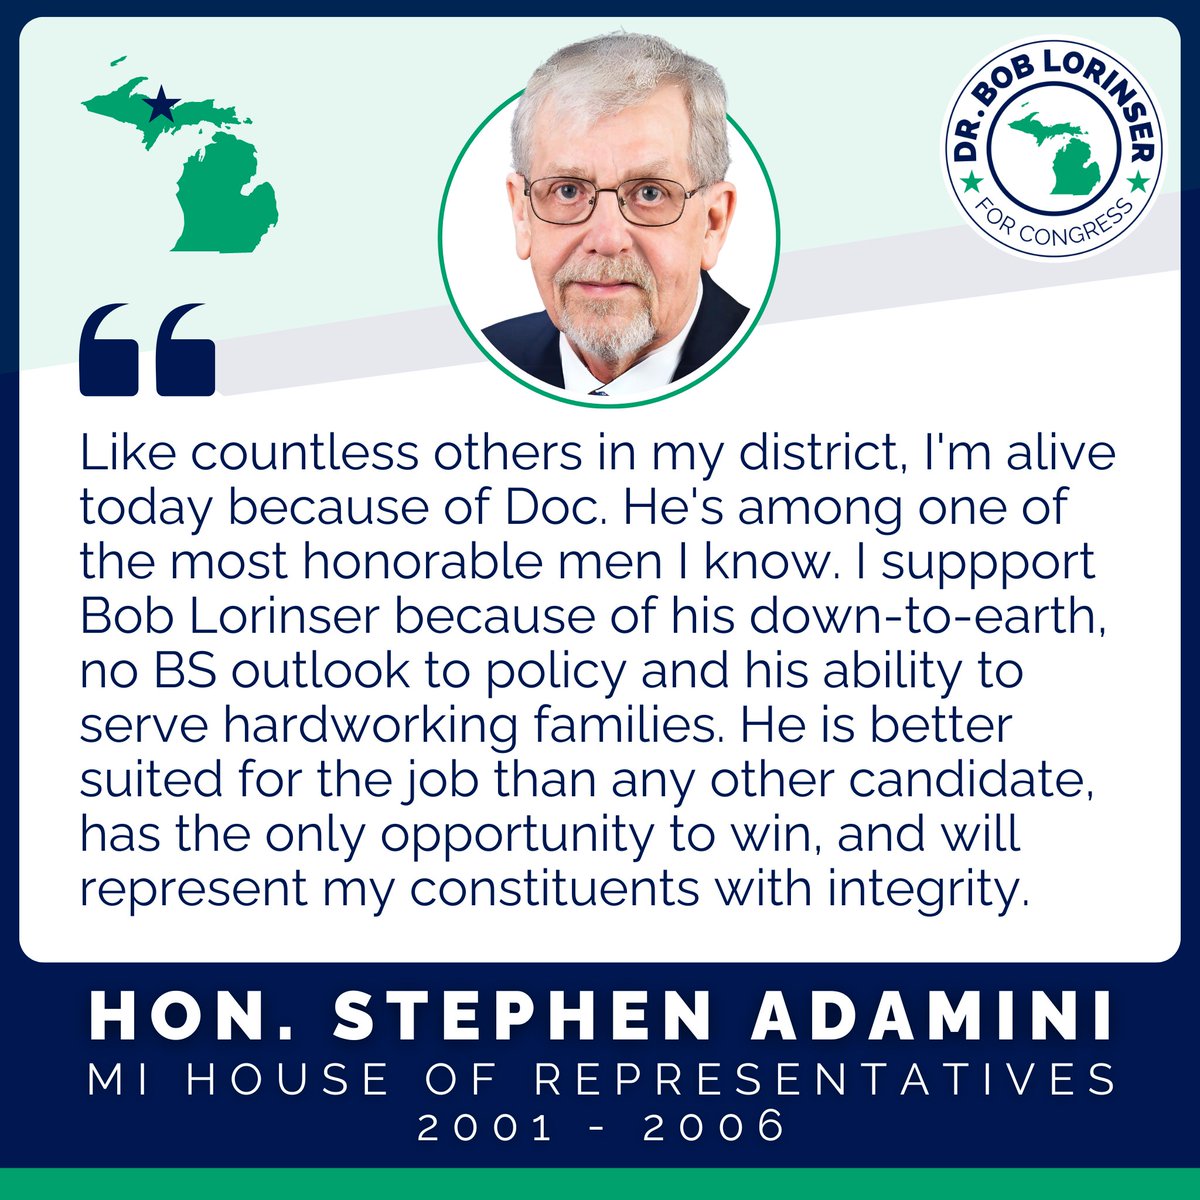 I am deeply humbled to receive the endorsement of Hon. Rep. Stephen Adamini, and I fully recognize the trust and confidence it represents. Thank you, Steve, for your support. #MI01 | drbob.me/adamini